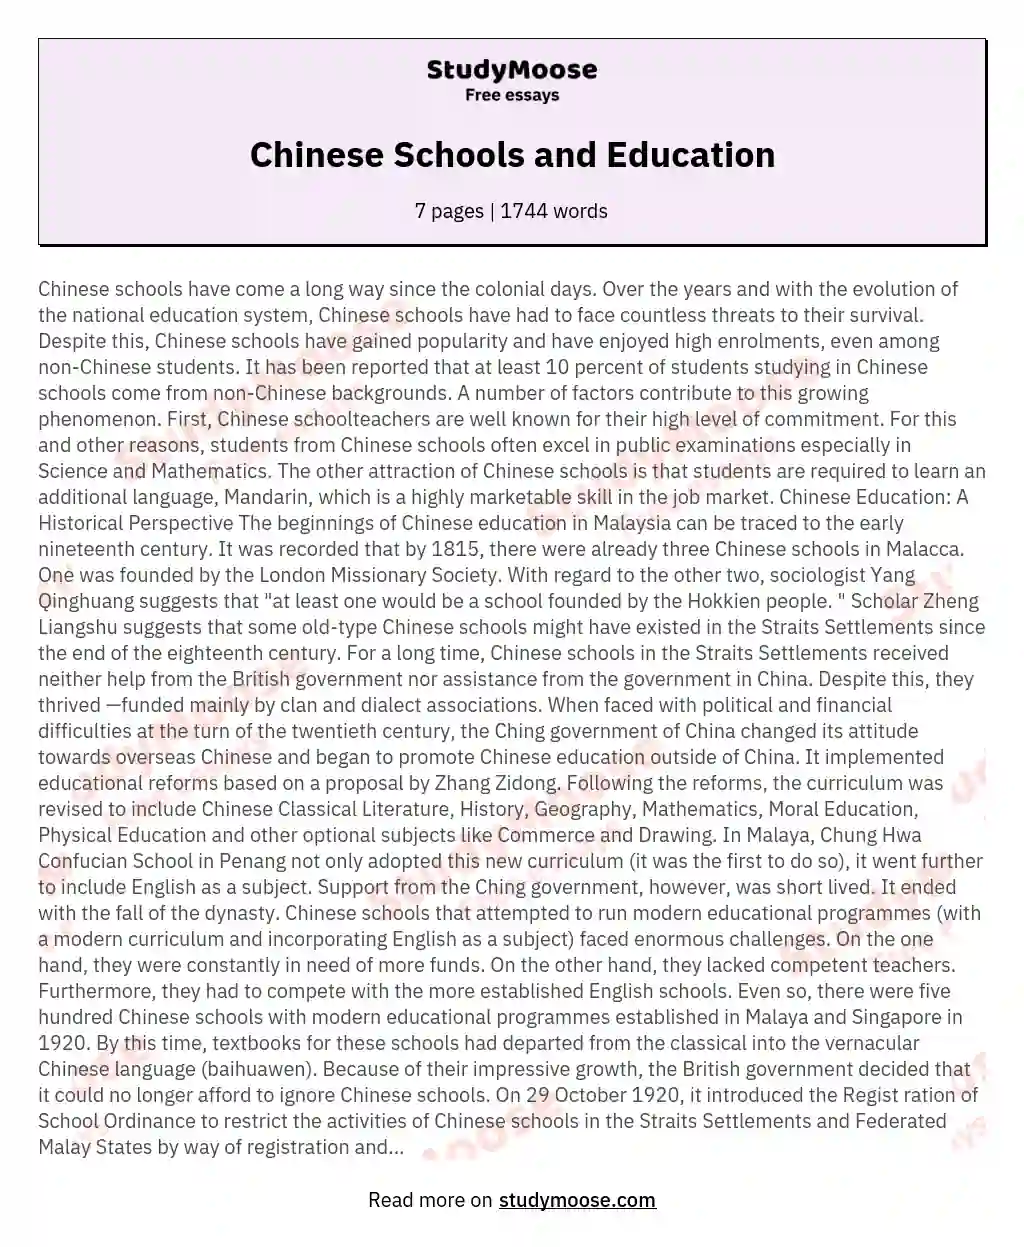 Chinese Schools and Education